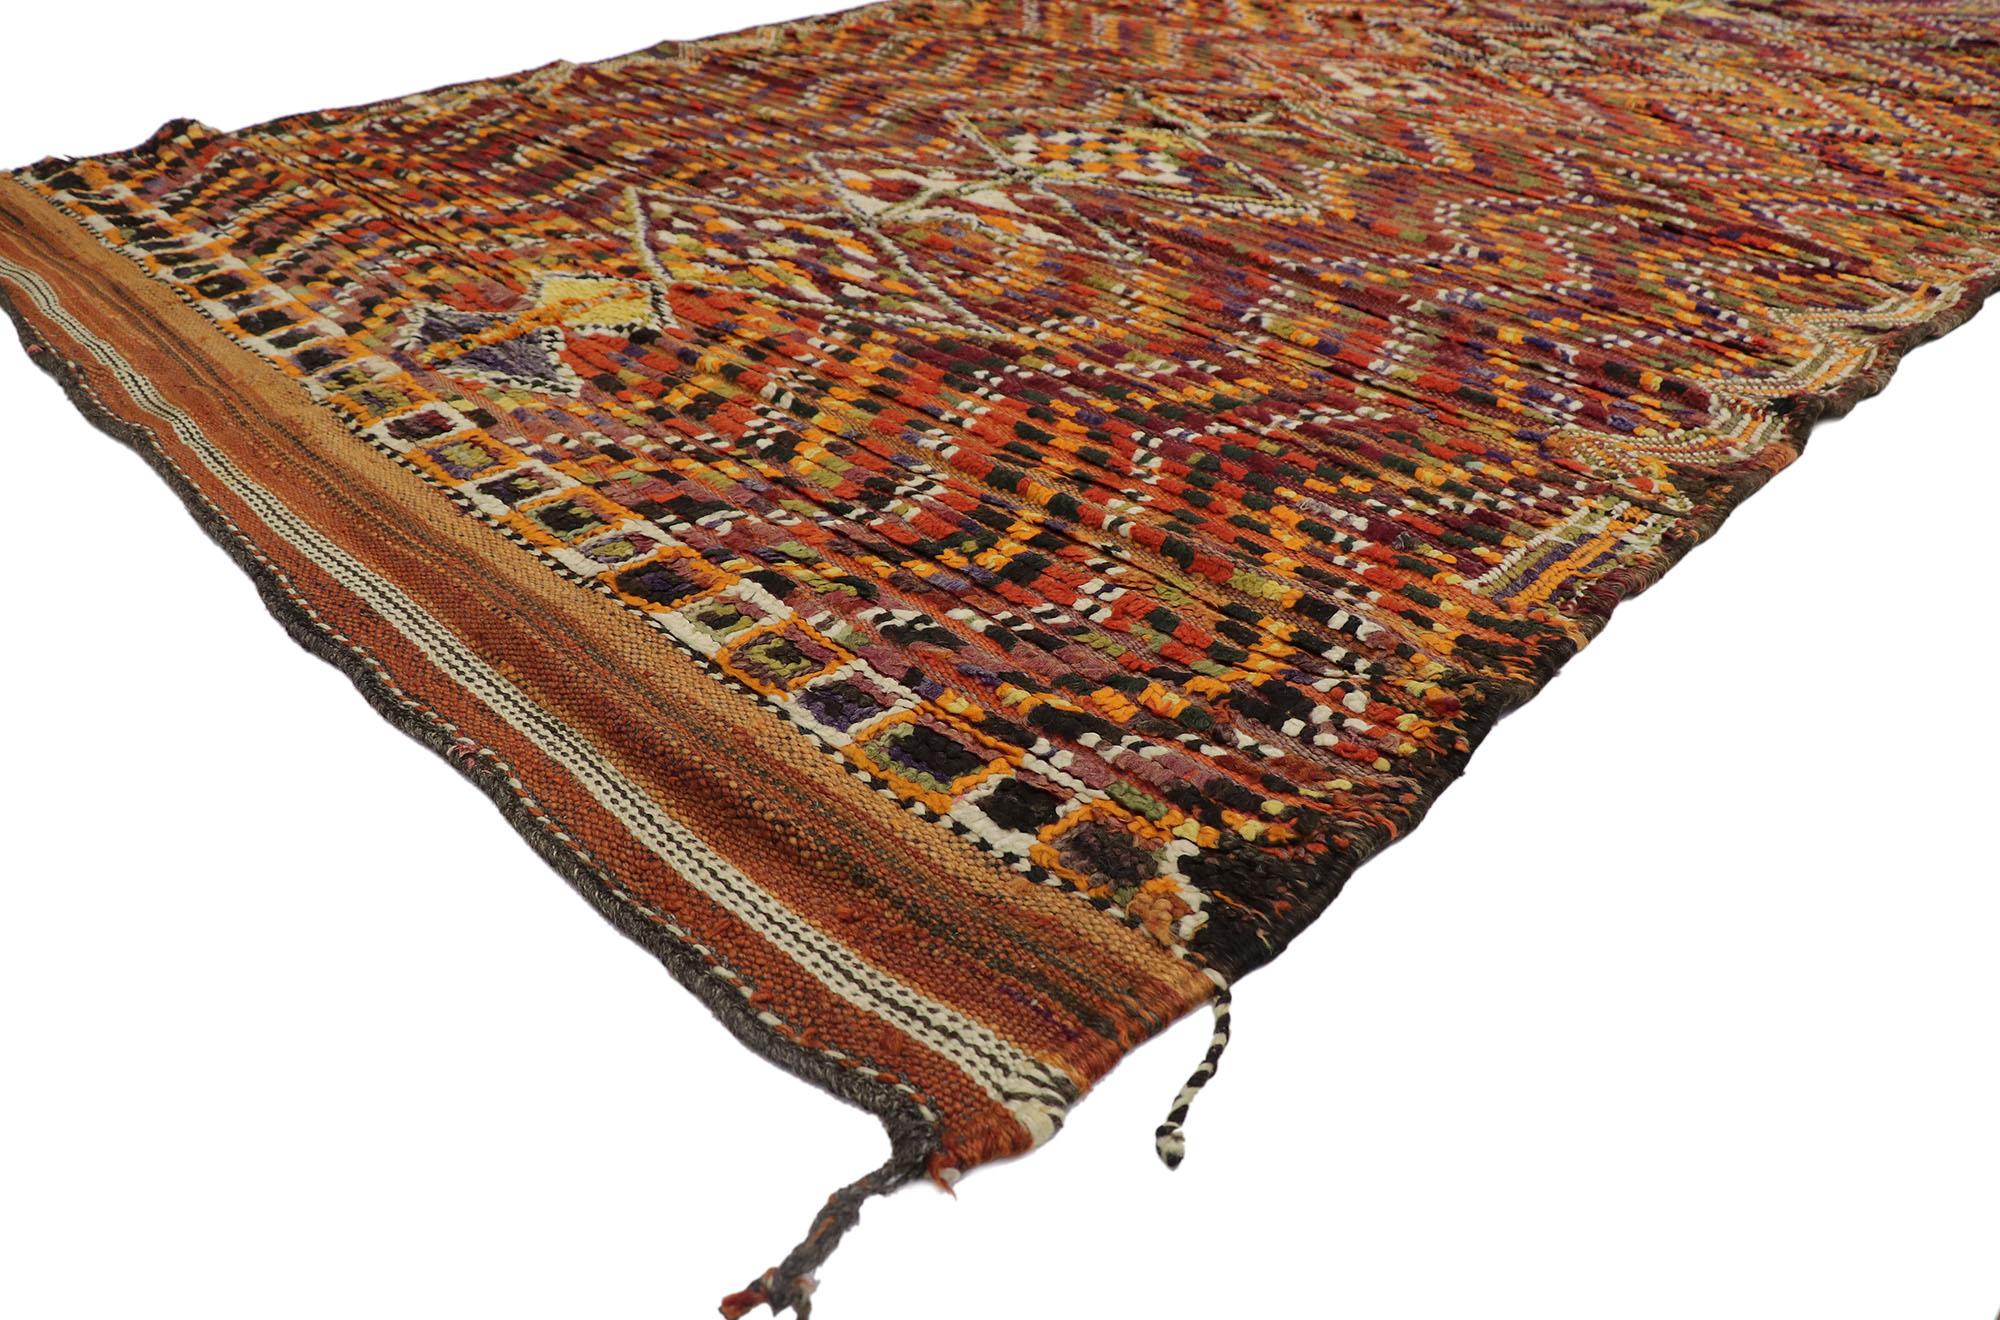 21283 Vintage Berber Moroccan rug, 06'02 x 10'04. With its nomadic charm, incredible detail and texture, this hand knotted wool vintage Moroccan rug is a captivating vision of woven beauty. The eye-catching evil-eye diamond pattern and energetic